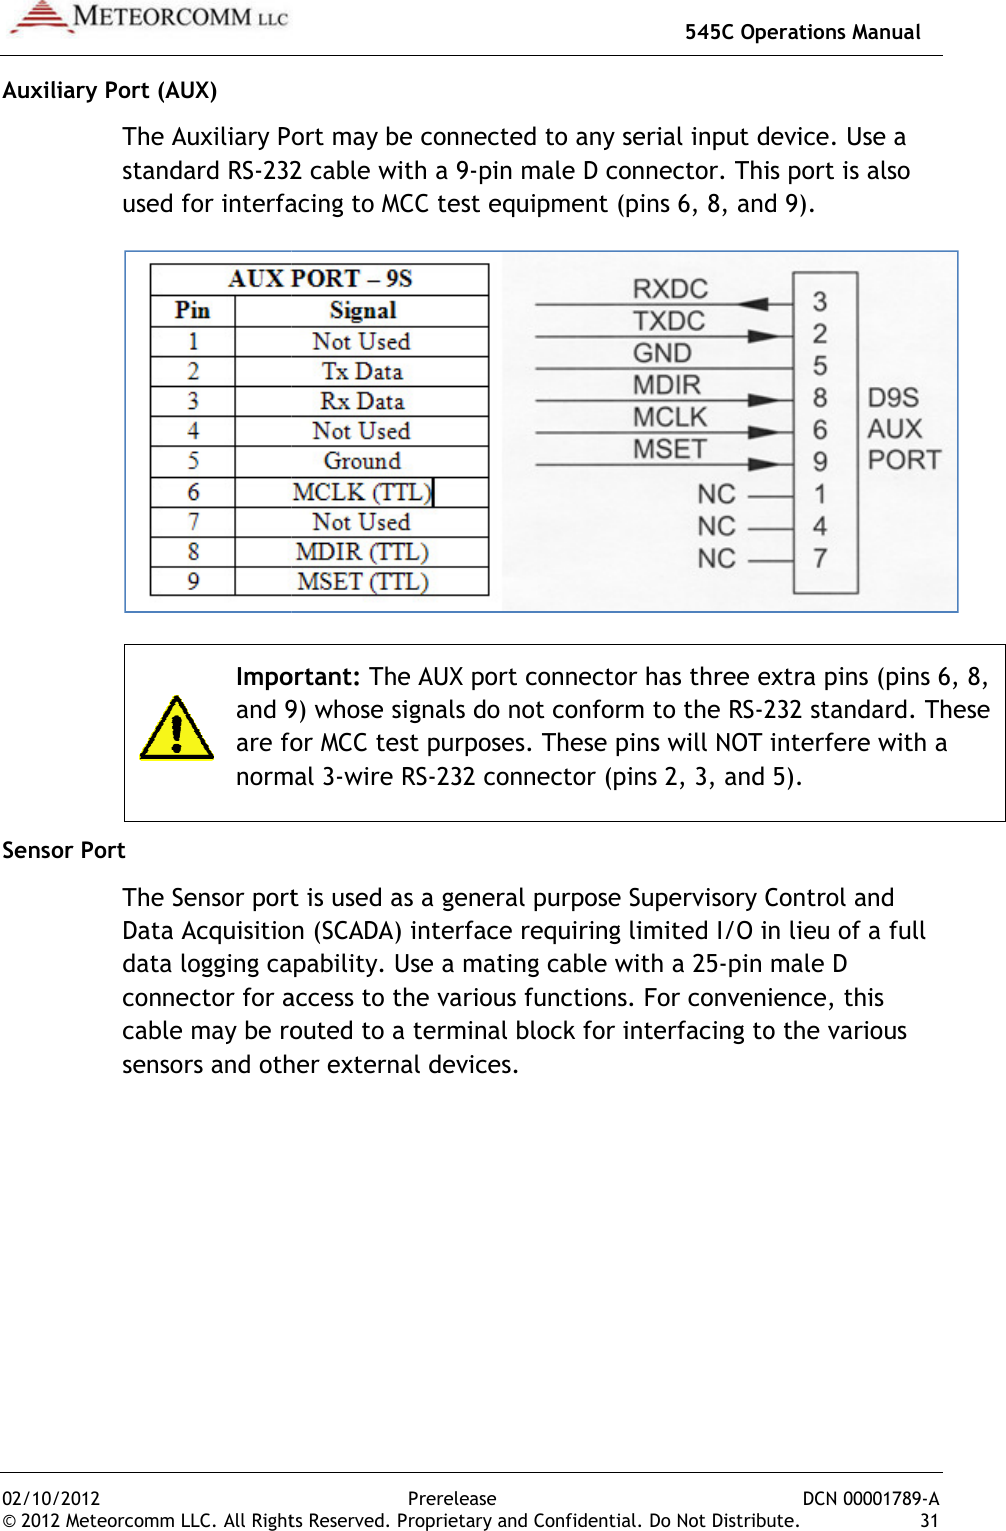 02/10/2012 © 2012 Meteorcomm LLC. All RightAuxiliary Port (AUX) The Auxiliary Port may be connected to any serial input devicestandard RS-232 cable with a 9used for interfacing to MCC test equipment (pins 6, 8, and 9). Importantand 9) whose signals do not conform to the RSare for MCC test purposes. These pins will NOT interfere with a normal 3Sensor Port The Sensor port is used as a generData Acquisition (SCADA) interface requiring limited I/O in lieu of a full data logging capabilityconnector for access to the various functionscable may be routed to a terminal block for interfacing to the various sensors and other external devices.  545C Operations ManualPrerelease hts Reserved. Proprietary and Confidential. Do Not DistribuThe Auxiliary Port may be connected to any serial input device232 cable with a 9-pin male D connector. This port is also used for interfacing to MCC test equipment (pins 6, 8, and 9).Important: The AUX port connector has three extra pins (pins 6, 8, and 9) whose signals do not conform to the RS-232 standard. These are for MCC test purposes. These pins will NOT interfere with a normal 3-wire RS-232 connector (pins 2, 3, and 5).The Sensor port is used as a general purpose Supervisory Control and Data Acquisition (SCADA) interface requiring limited I/O in lieu of a full data logging capability. Use a mating cable with a 25-pin male D connector for access to the various functions. For convenience, this routed to a terminal block for interfacing to the various sensors and other external devices.  545C Operations Manual DCN 00001789-A ibute.  31 The Auxiliary Port may be connected to any serial input device. Use a This port is also used for interfacing to MCC test equipment (pins 6, 8, and 9).  hree extra pins (pins 6, 8, 232 standard. These are for MCC test purposes. These pins will NOT interfere with a 232 connector (pins 2, 3, and 5). al purpose Supervisory Control and Data Acquisition (SCADA) interface requiring limited I/O in lieu of a full pin male D For convenience, this routed to a terminal block for interfacing to the various 